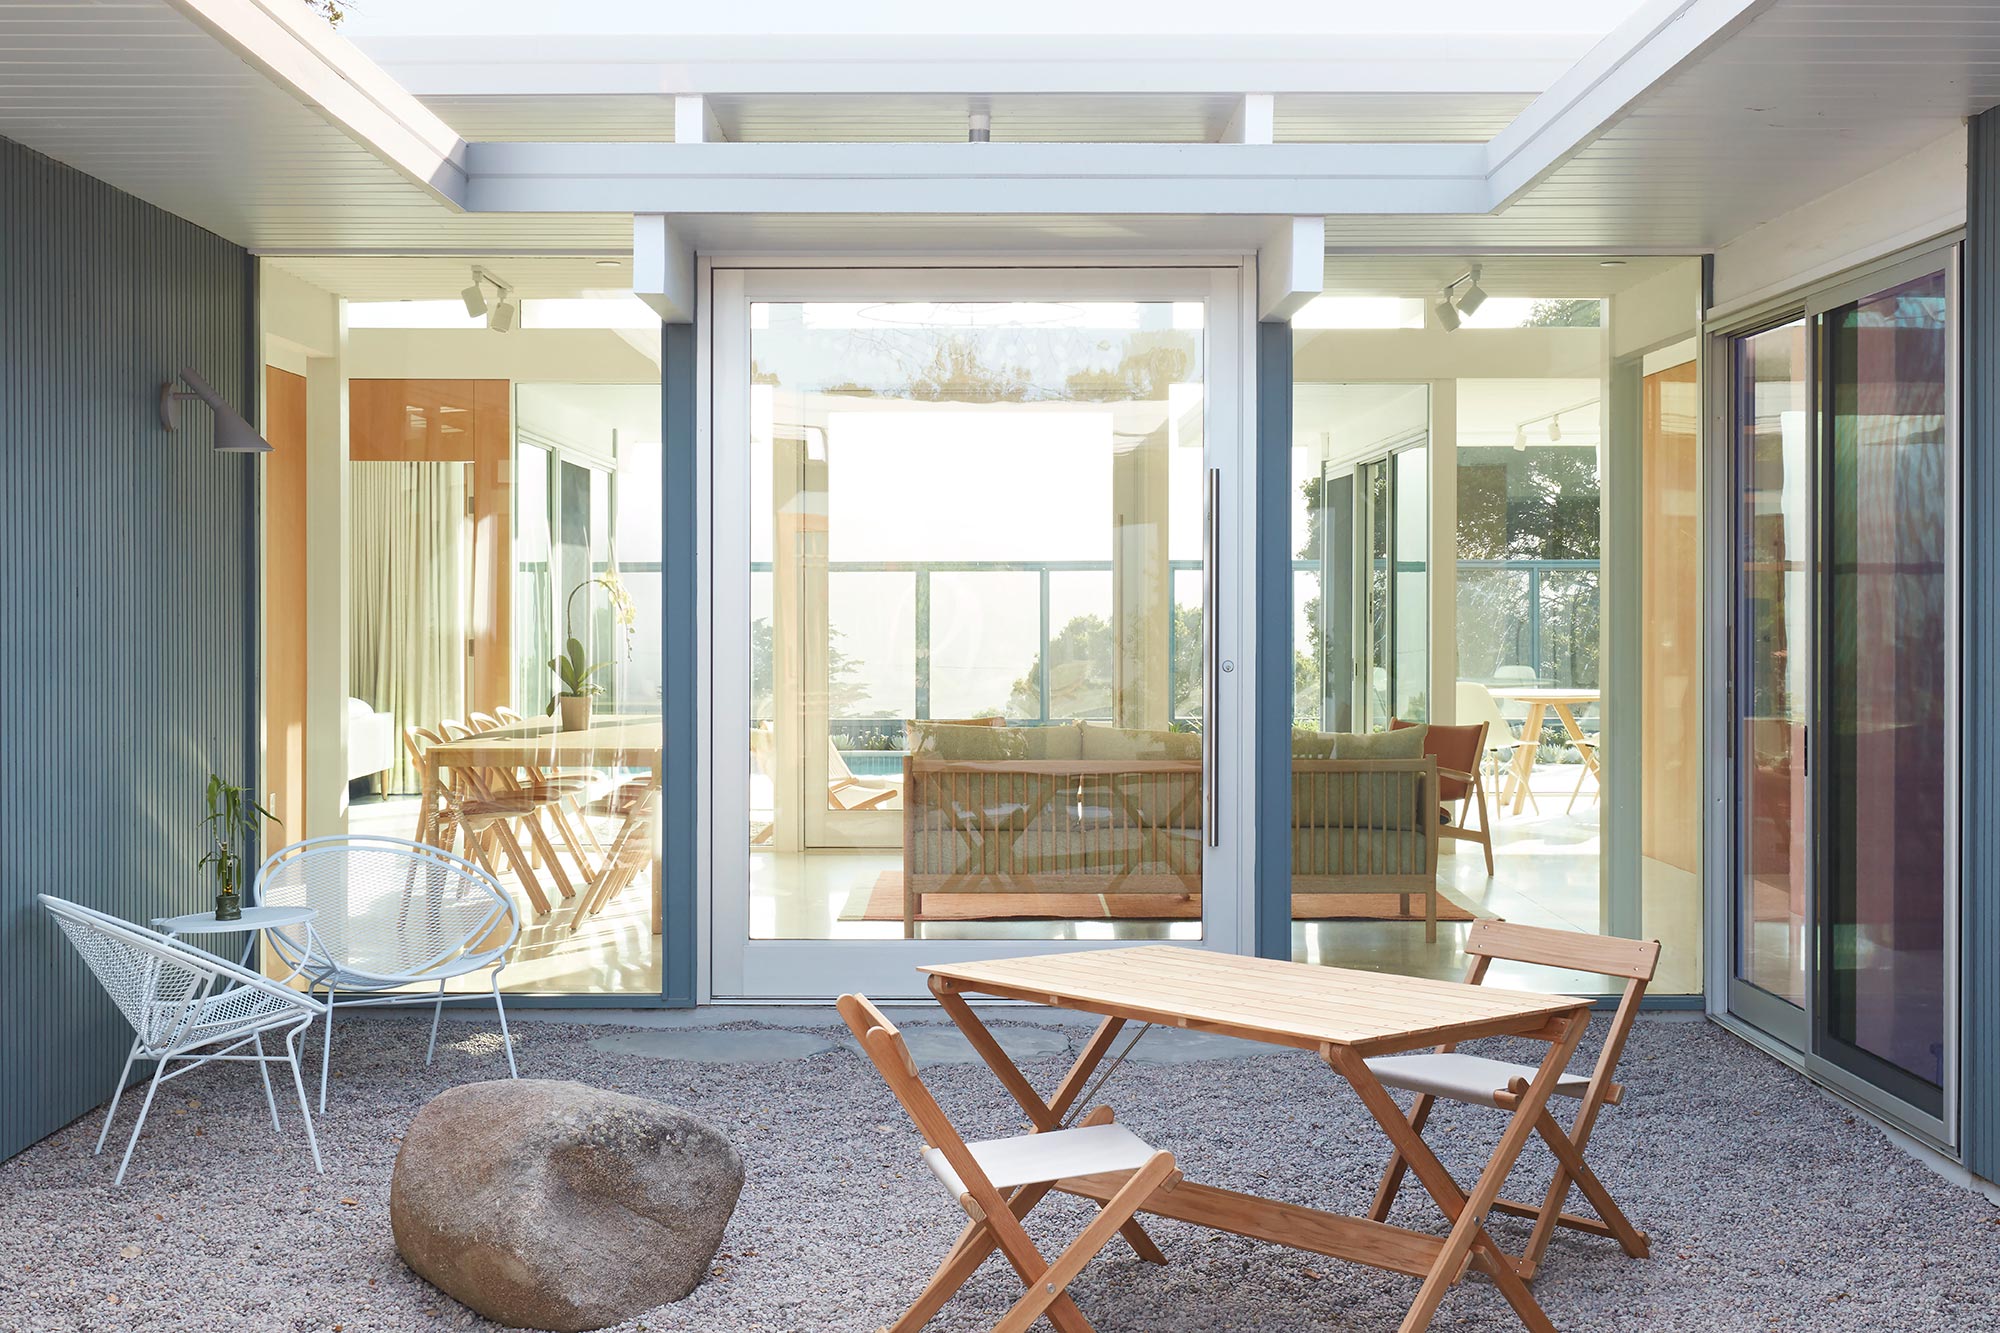 A massive, hinged door surrounded by fixed windows connects an outdoor seating are to the indoor seating area.